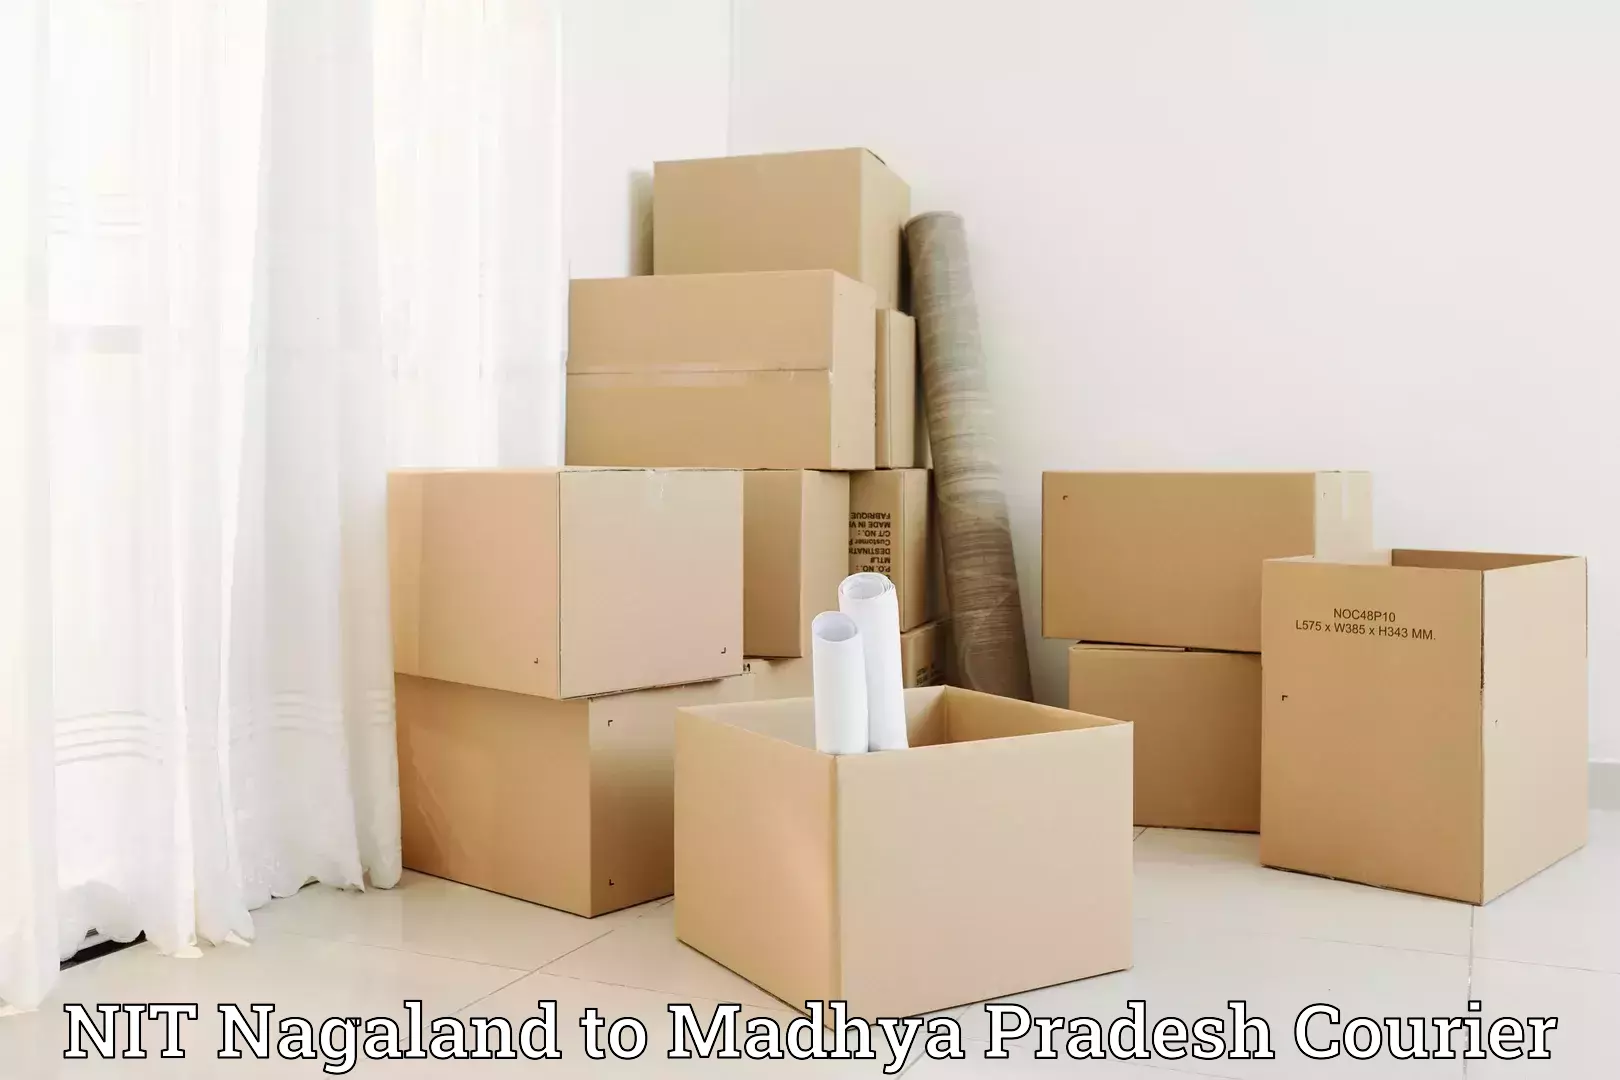 Trusted moving company NIT Nagaland to Indore